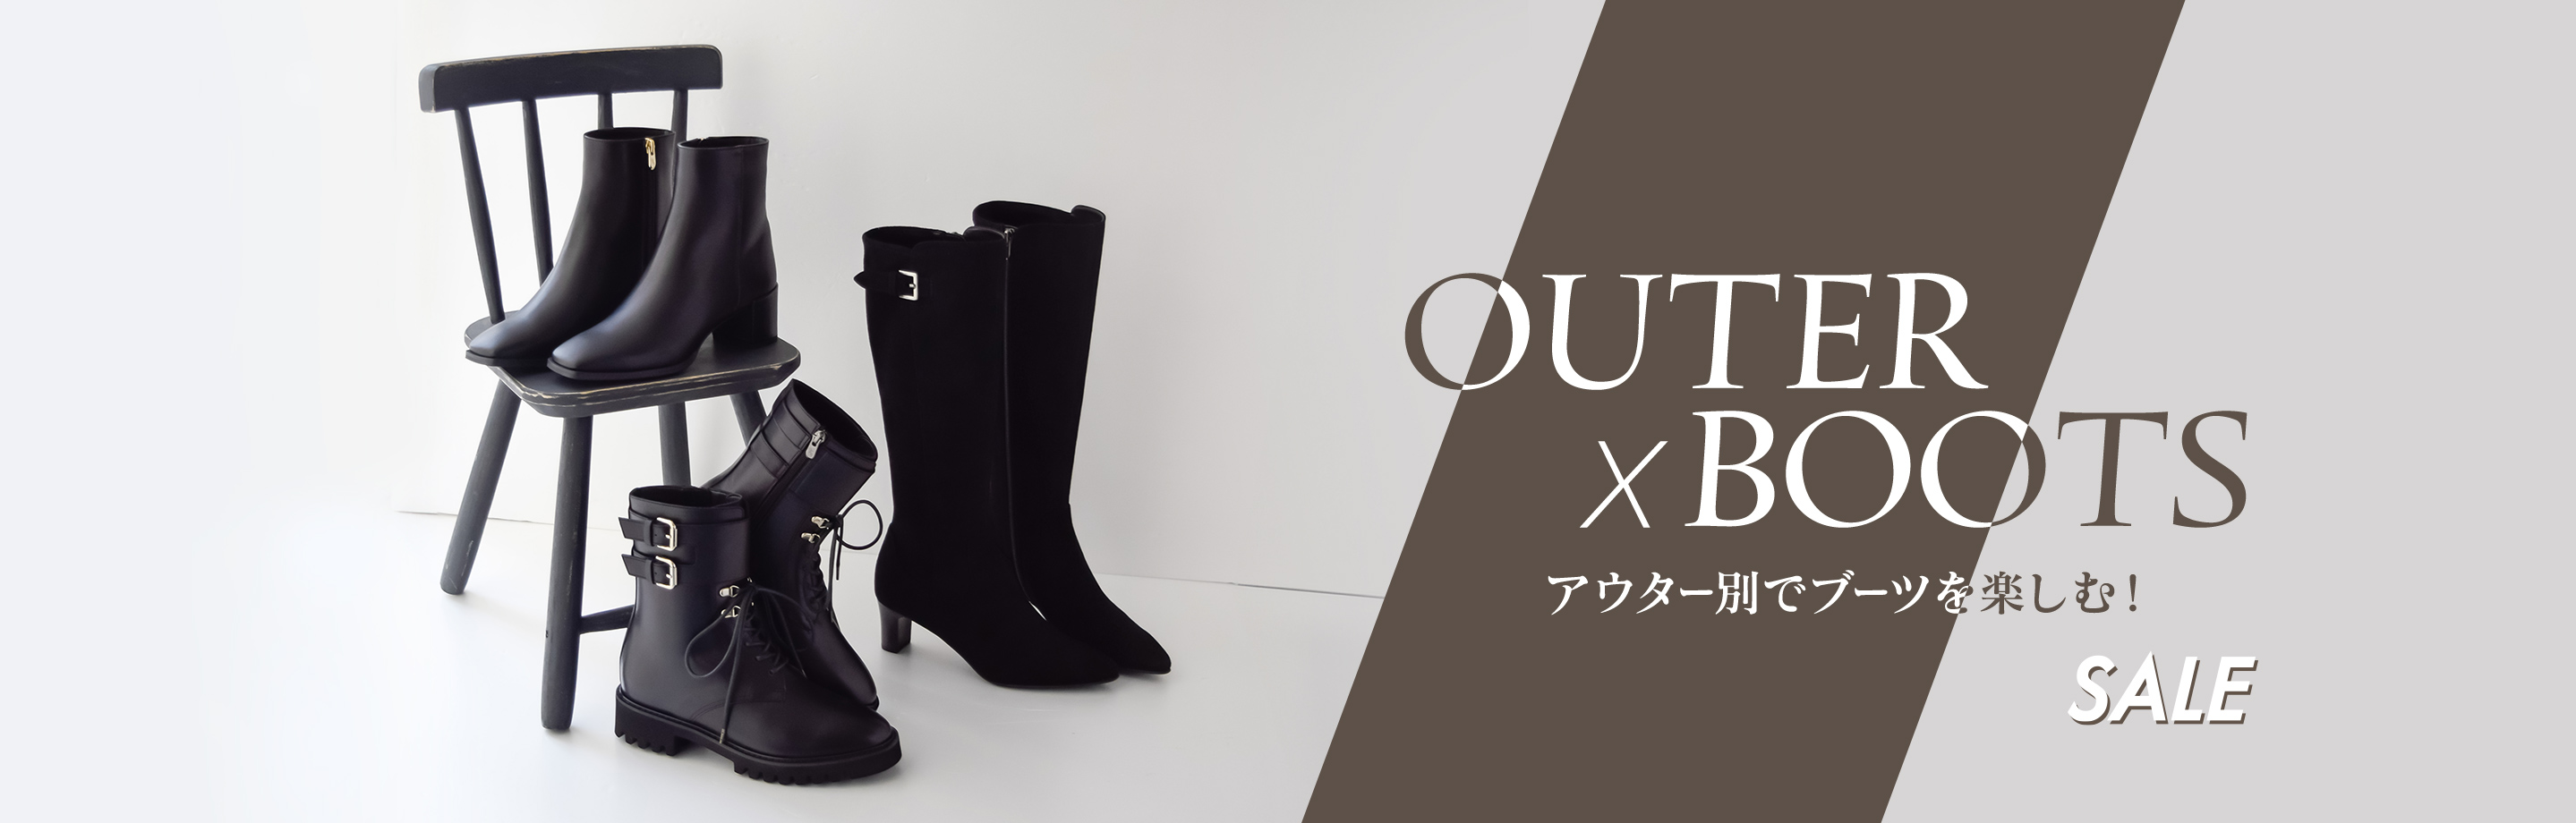 【SALE】OUTER×BOOTS　アウター別でブーツを楽しむ！